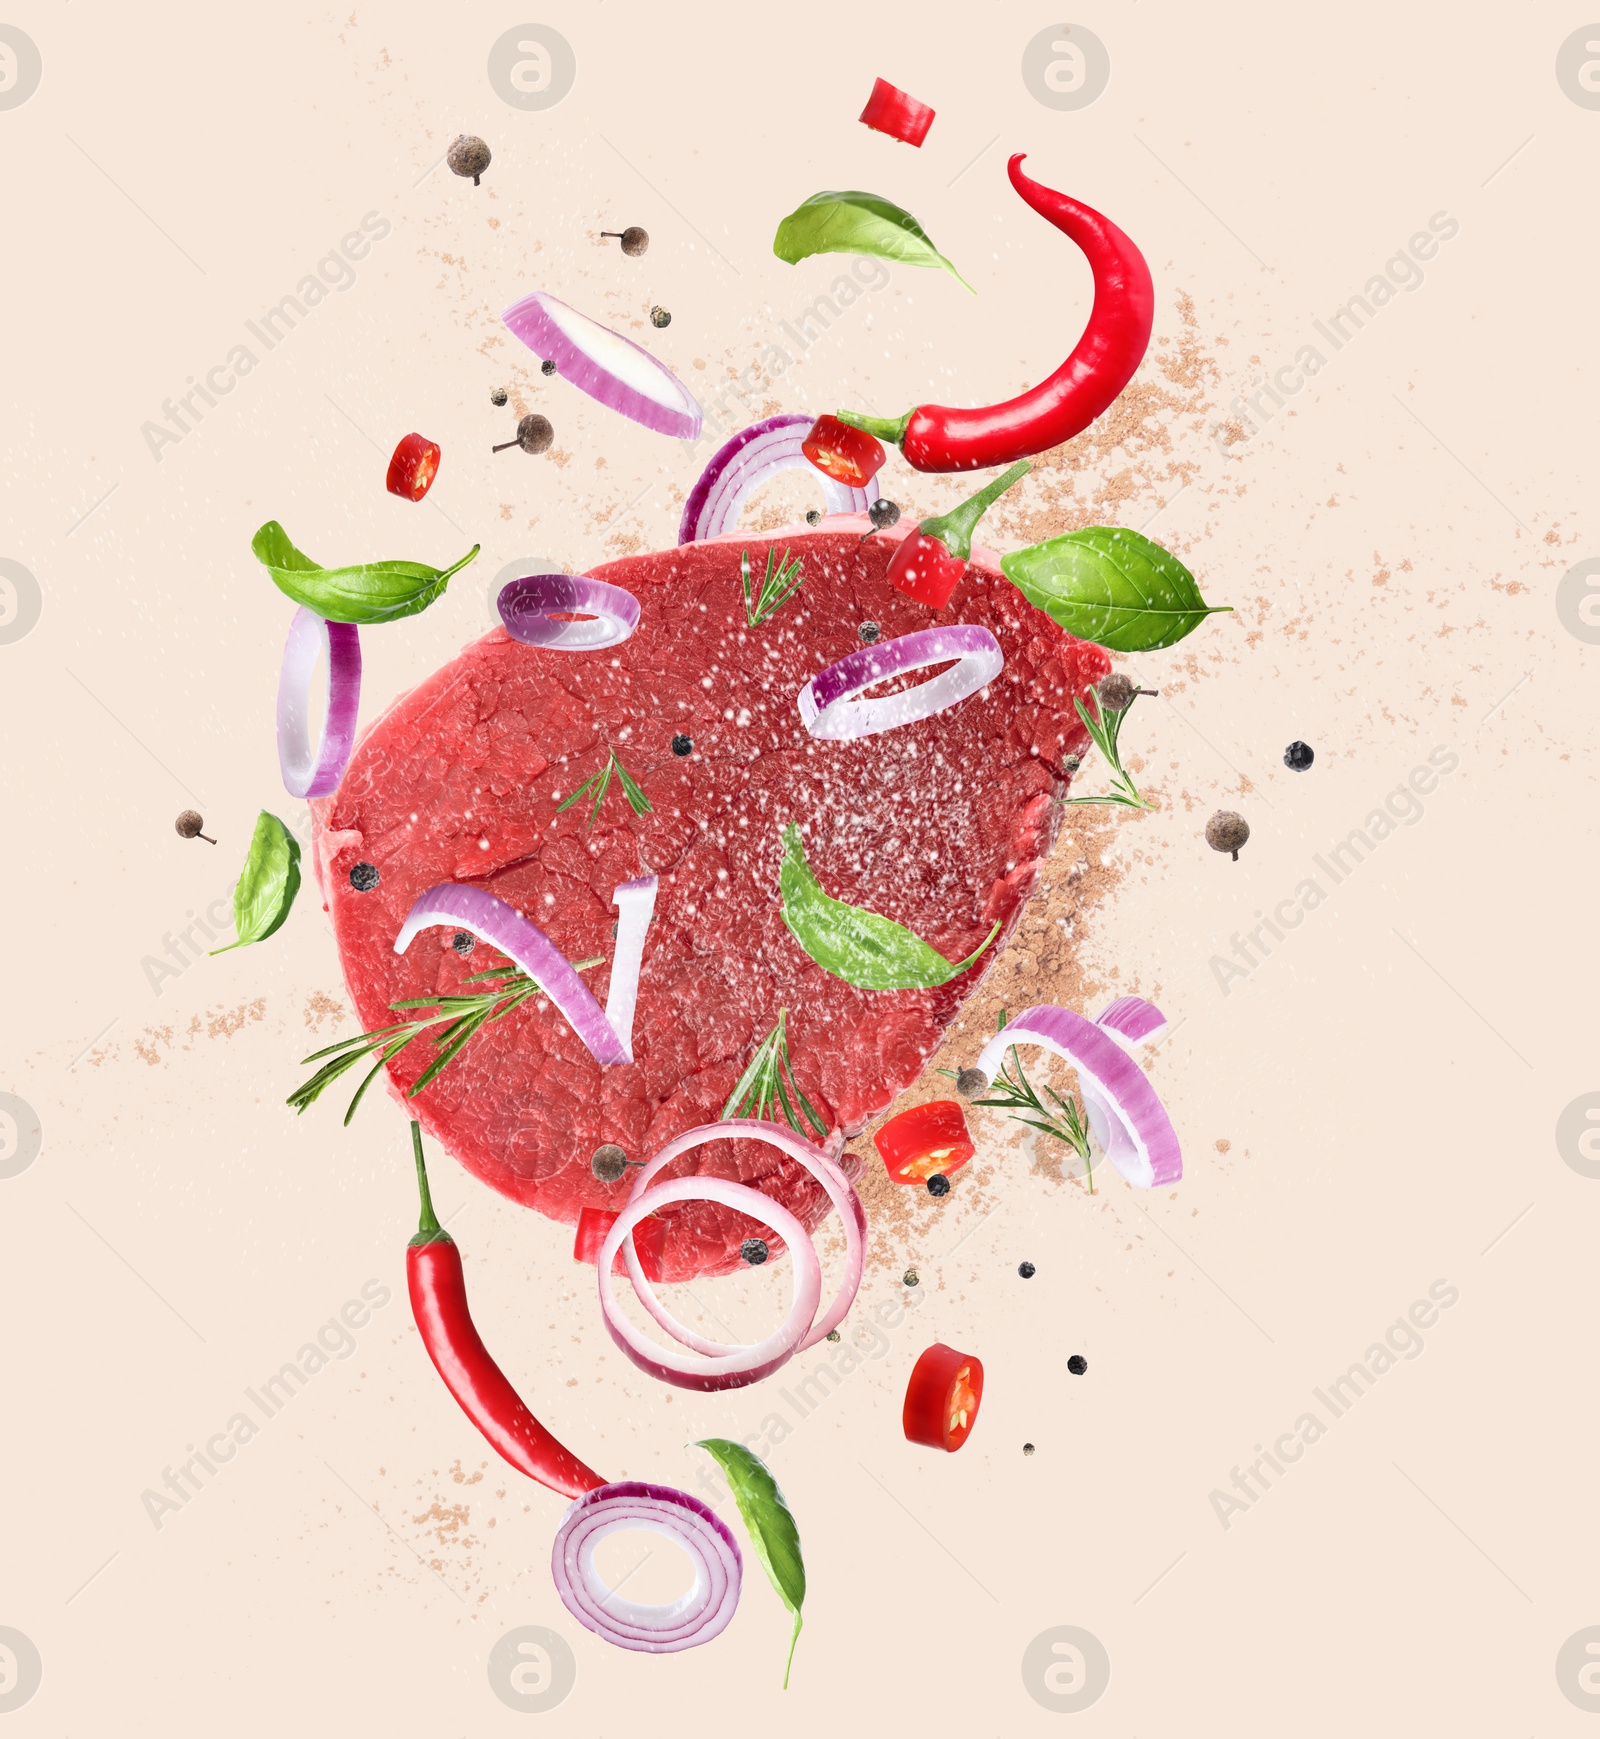 Image of Fresh raw meat and different spices flying on beige background